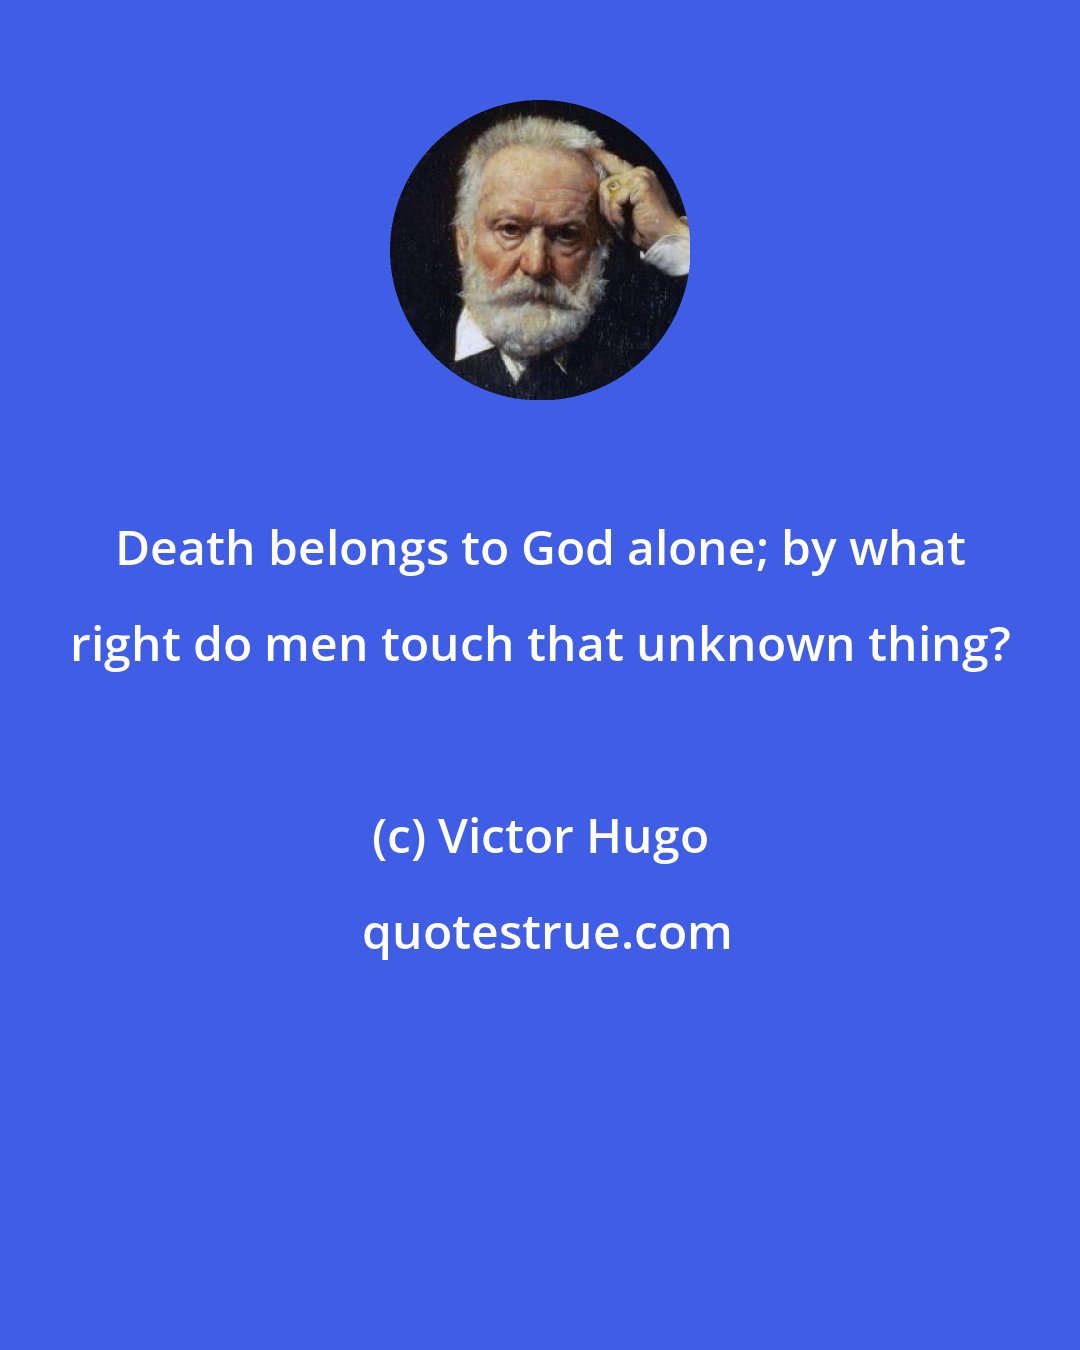 Victor Hugo: Death belongs to God alone; by what right do men touch that unknown thing?